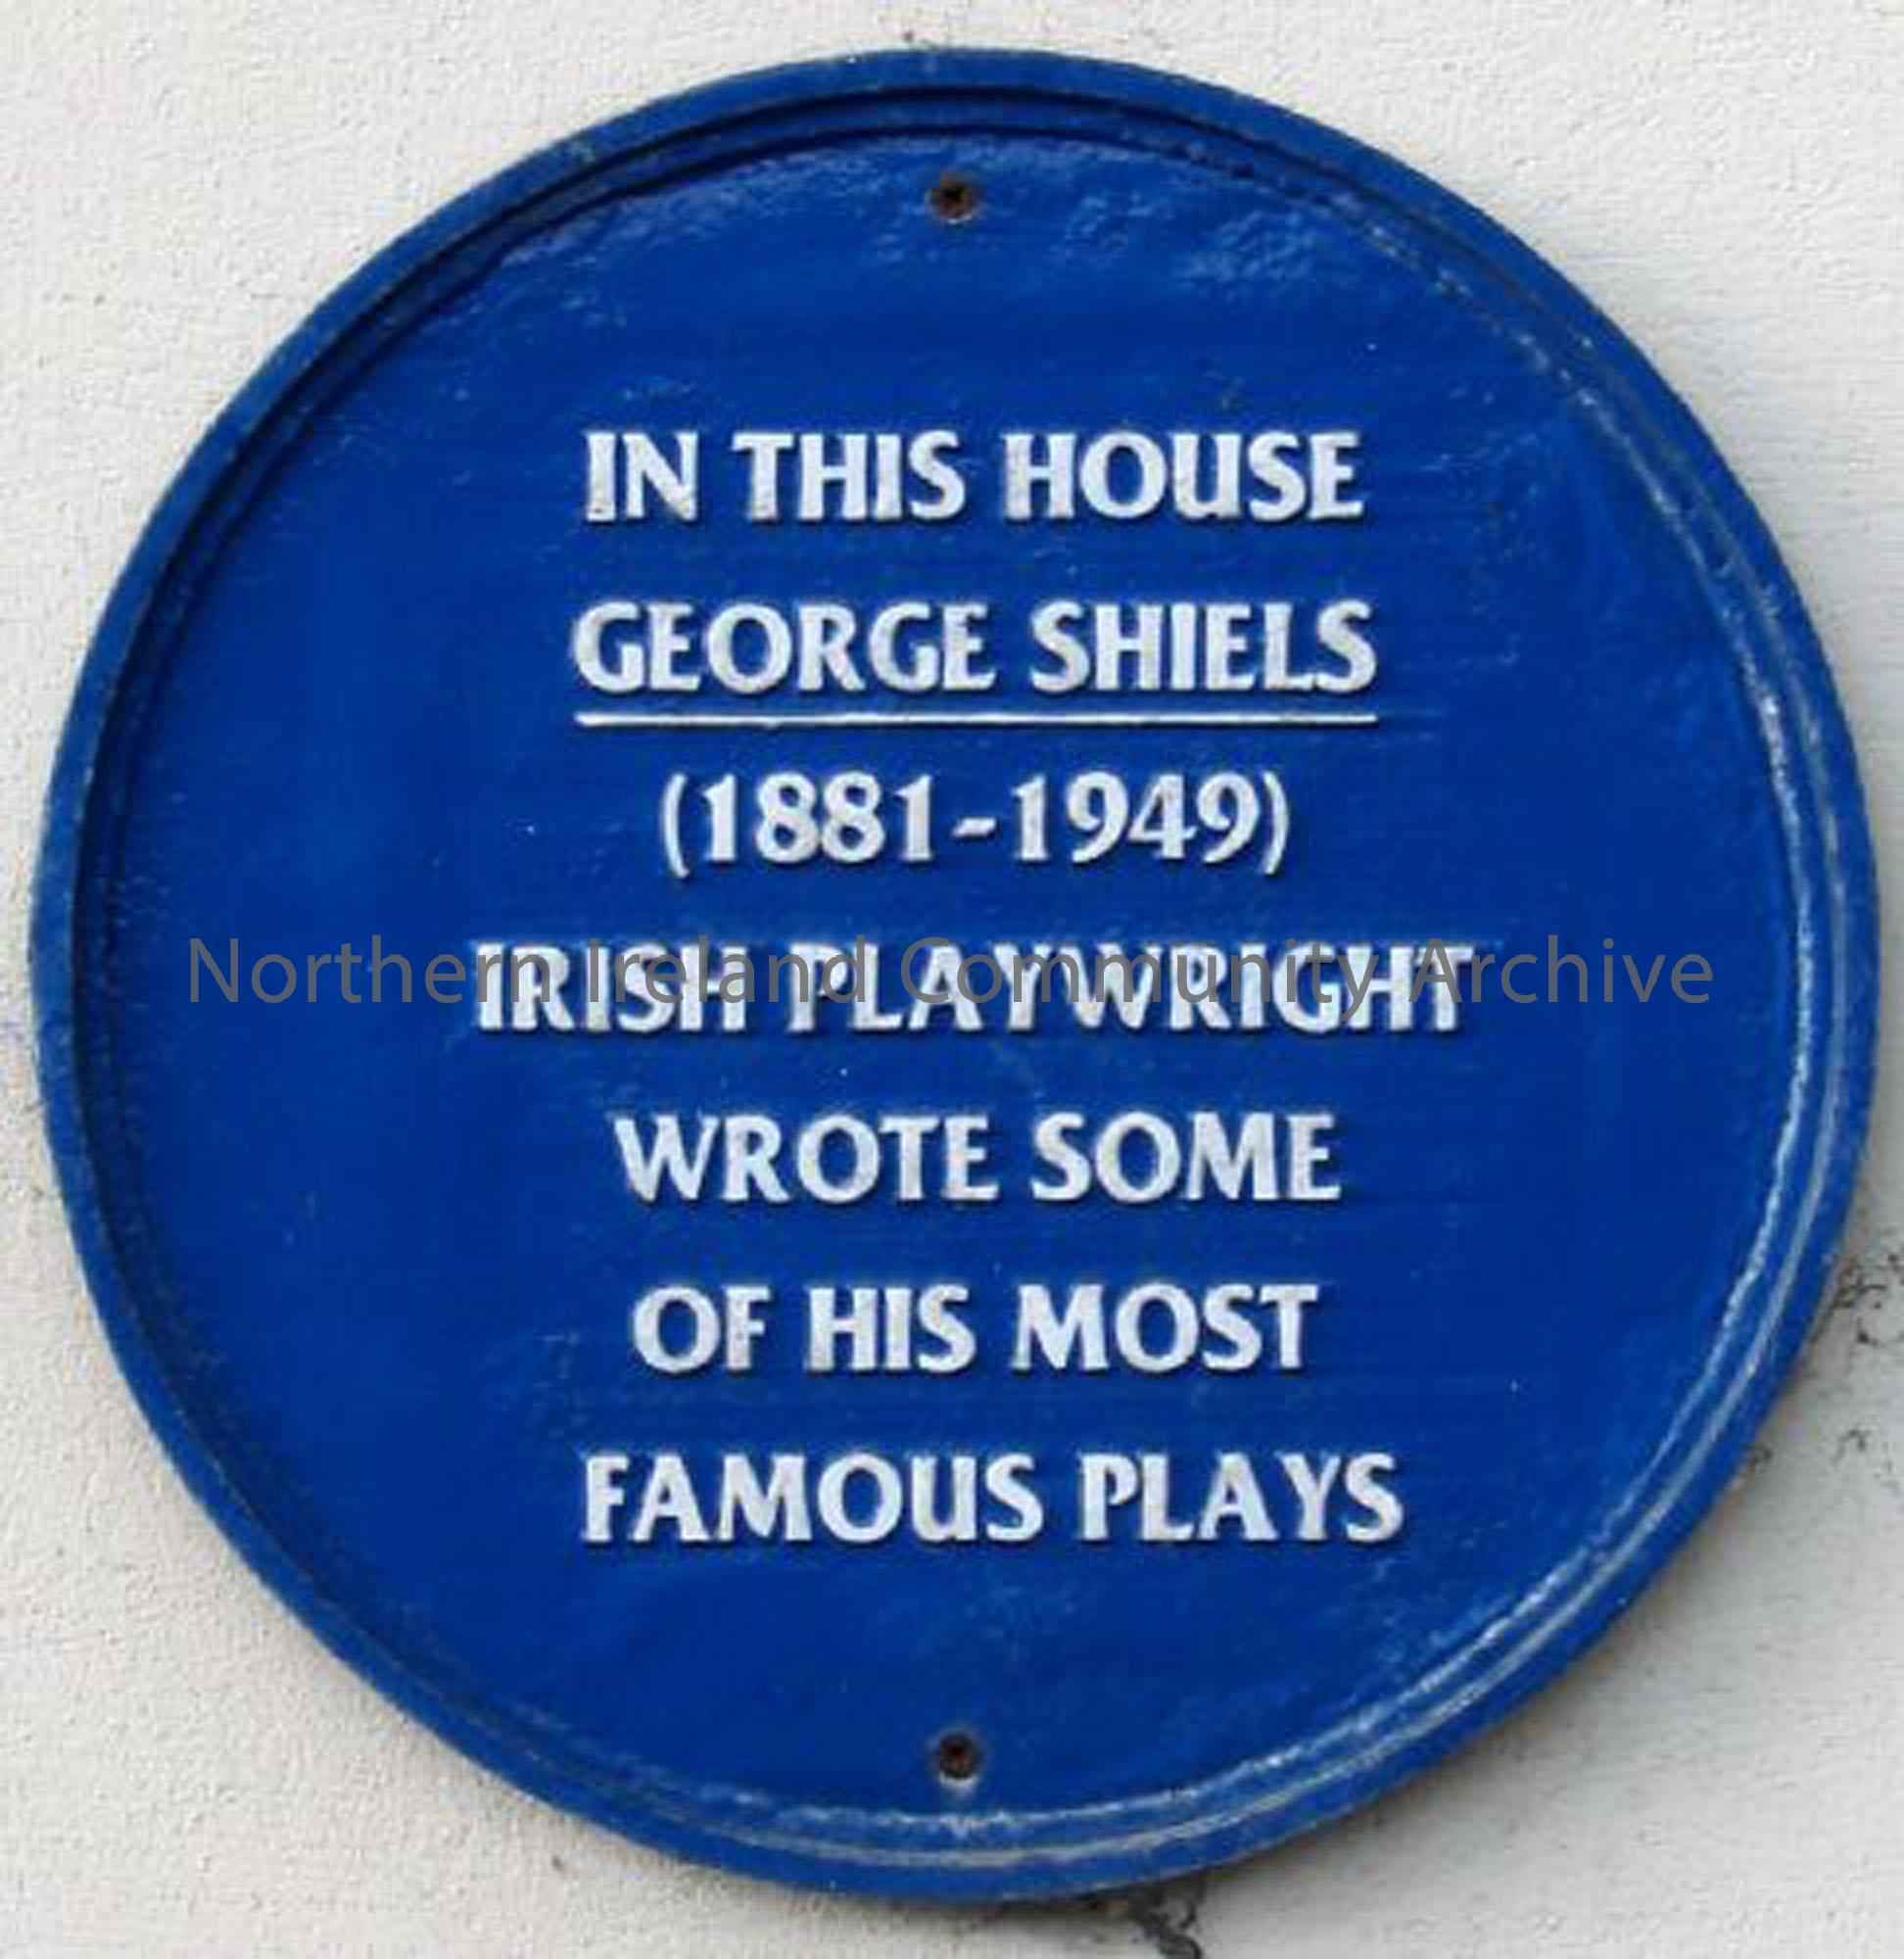 Plaque at George Shiels’ house (3340)